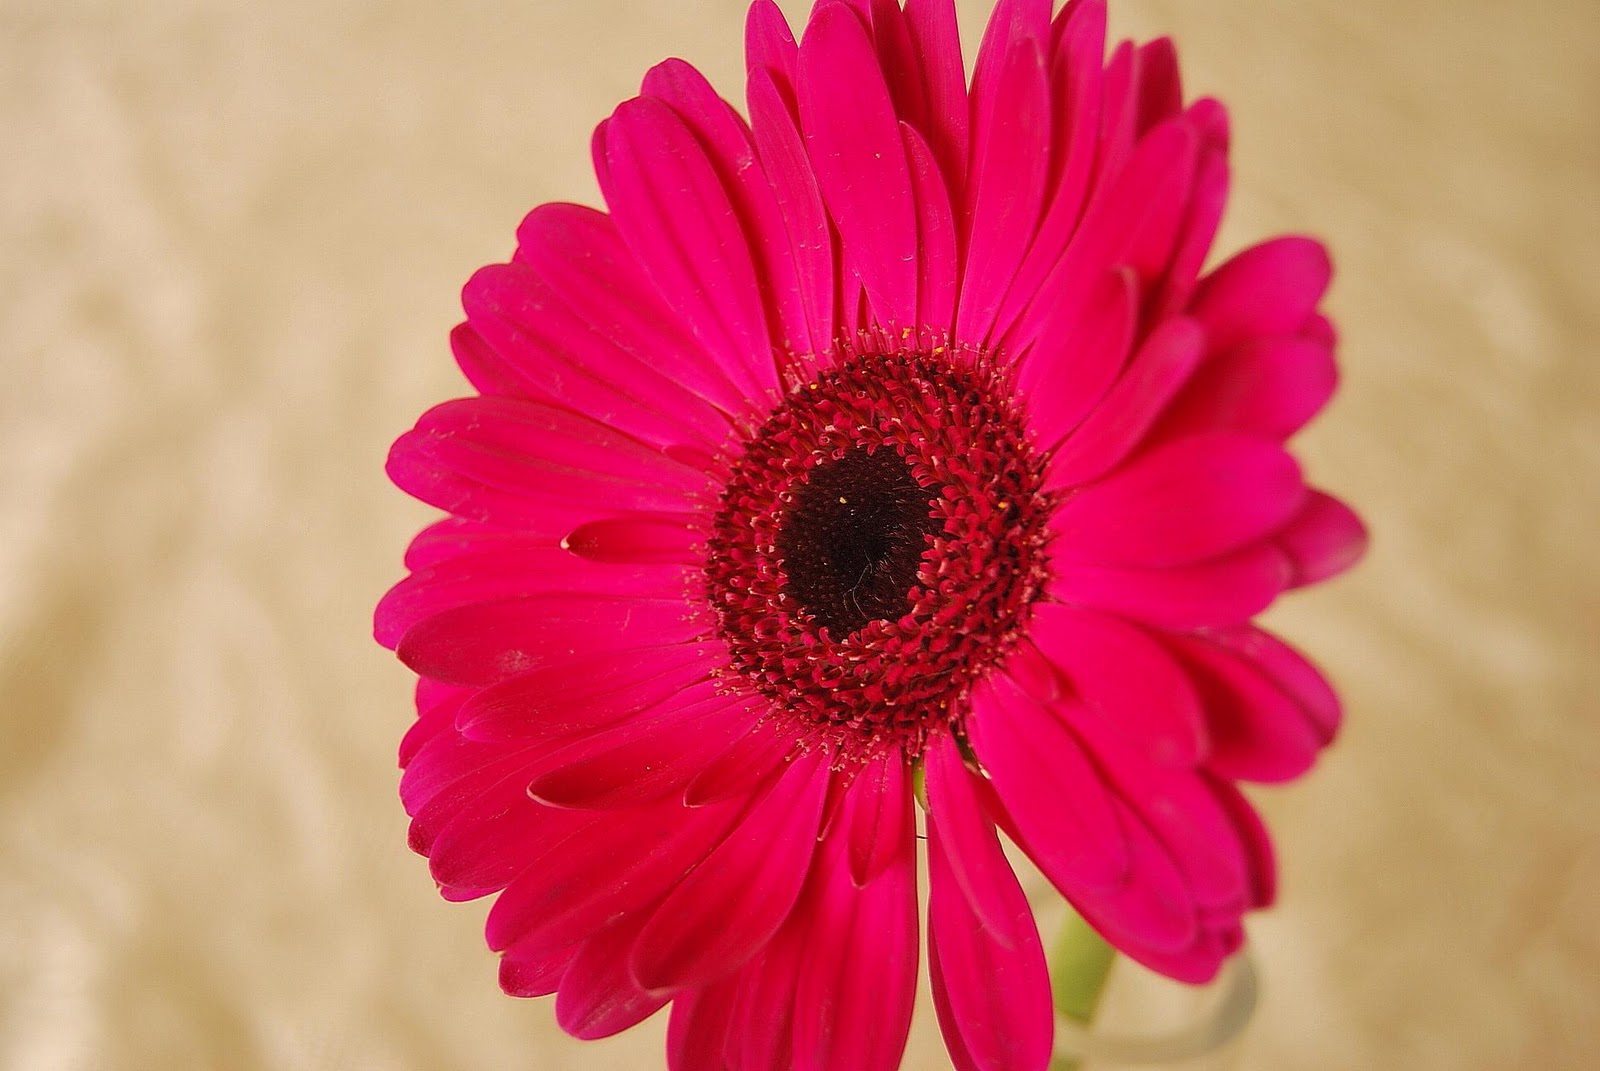 Even my wedding bouquet was composed of big red Gerberas with hint of red